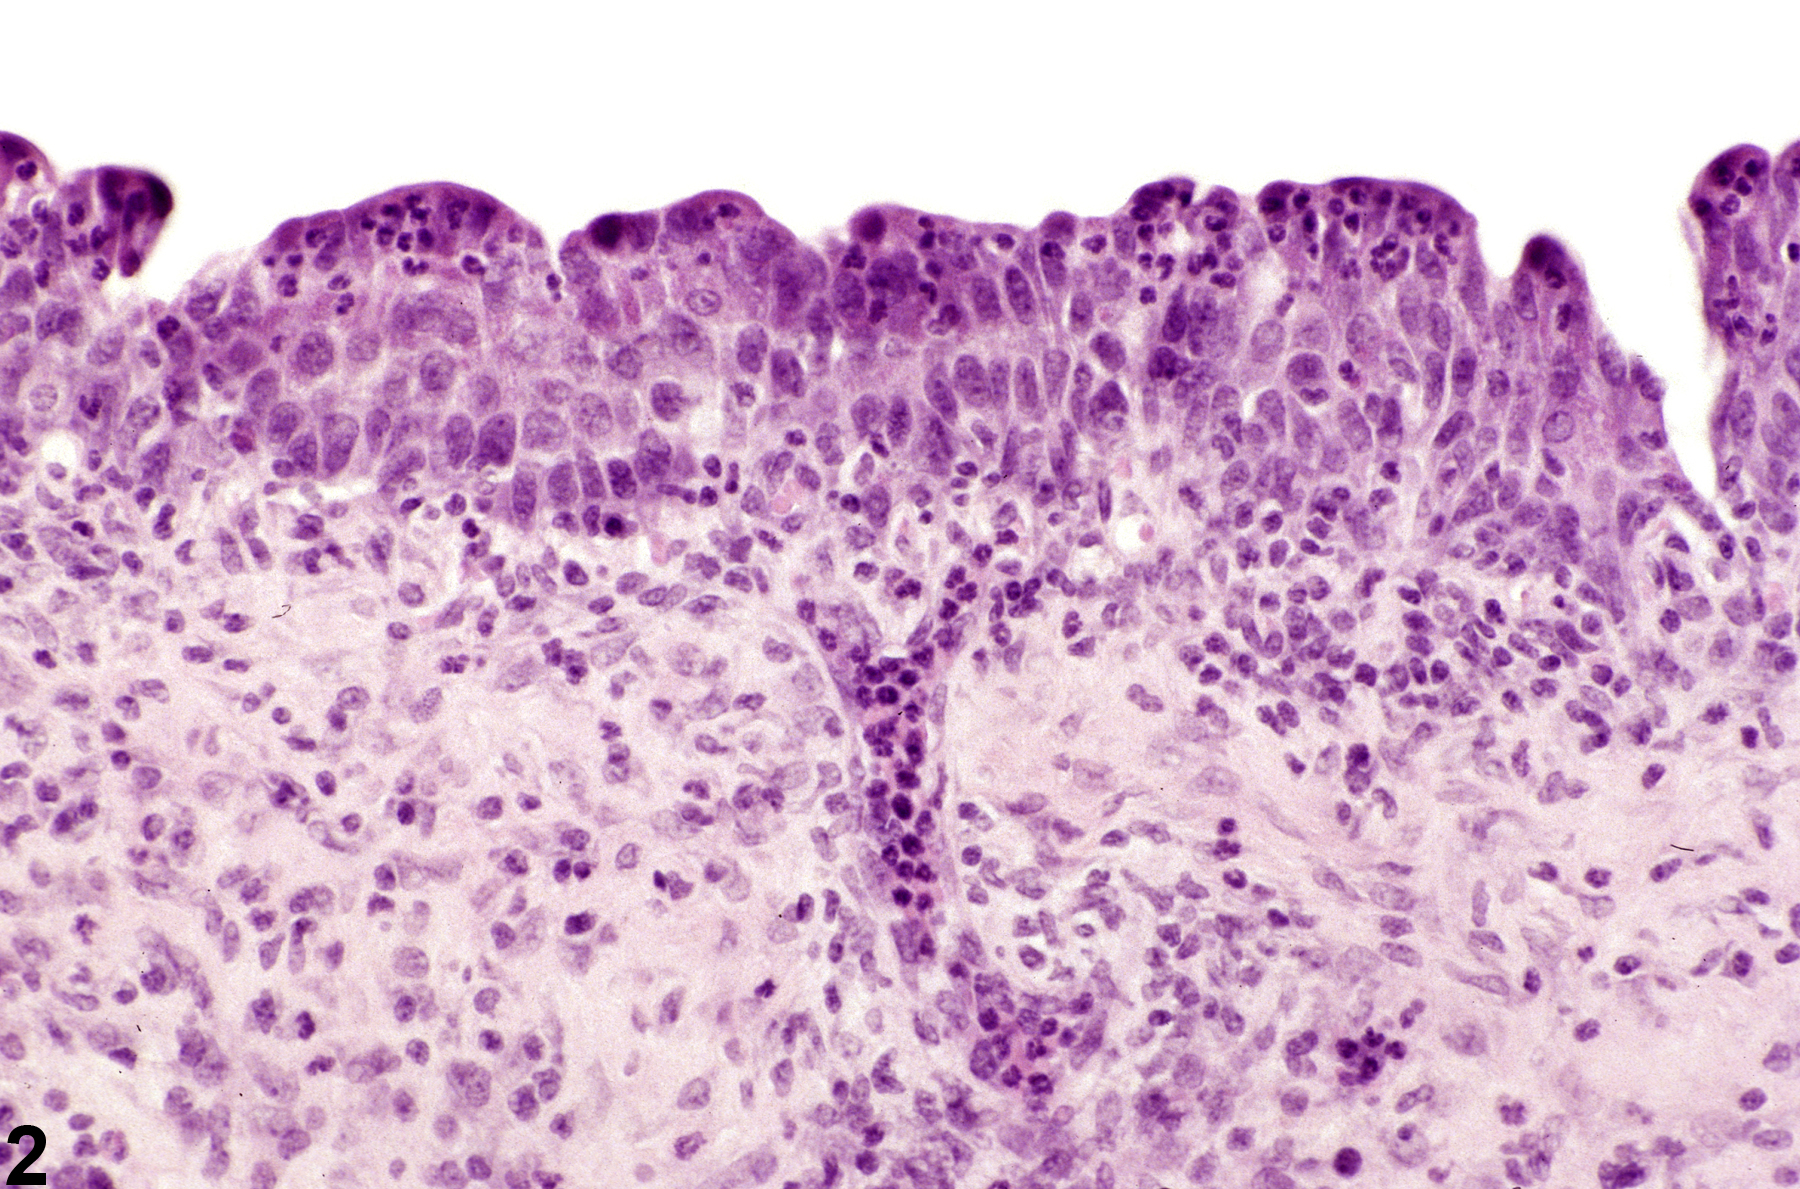 Image of inflammation in the urinary bladder from a male F344/N rat in a chronic study